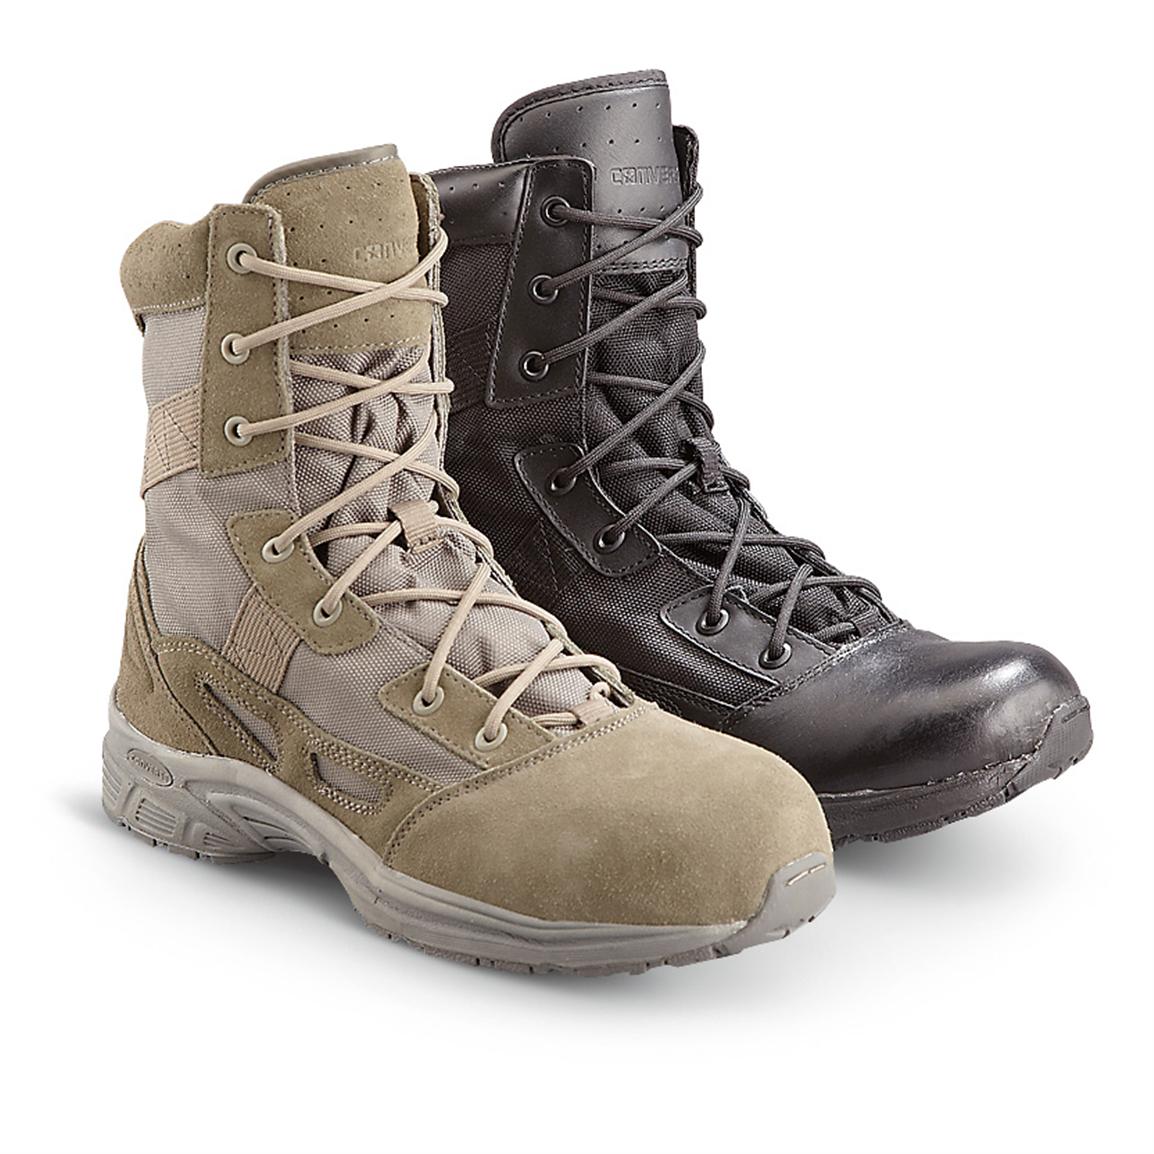 converse tactical boots 6 inch